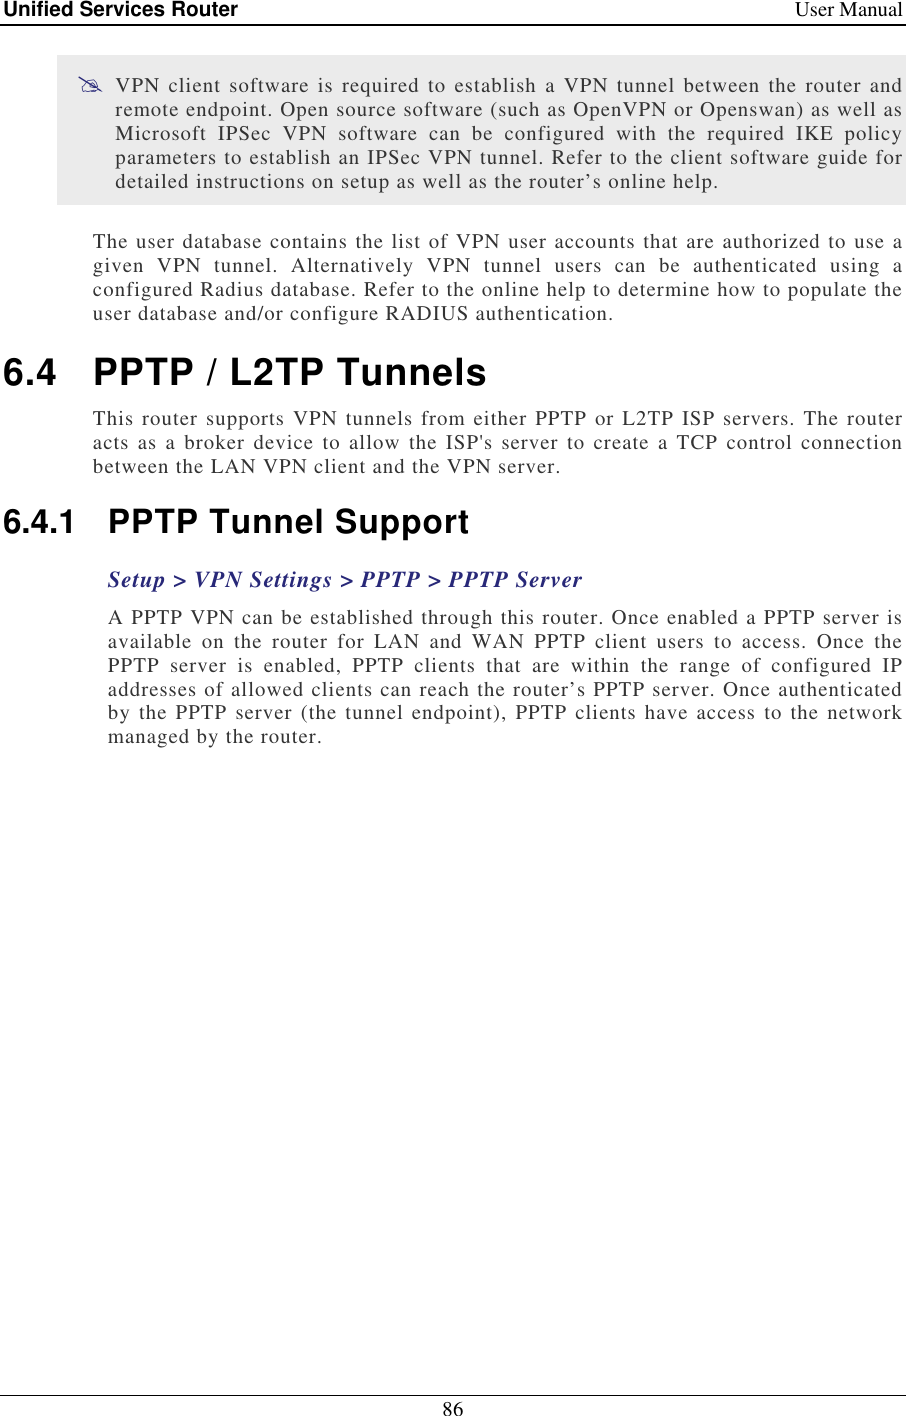 Unified Services Router    User Manual 86   VPN  client  software is required  to  establish  a  VPN  tunnel  between  the router  and remote endpoint. Open source software (such as OpenVPN or Openswan) as well as Microsoft  IPSec  VPN  software  can  be  configured  with  the  required  IKE  policy parameters to establish an IPSec VPN tunnel. Refer to the client software guide for detailed instructions on setup as well as the router’s online help.  The user database contains the list of VPN user accounts that are authorized to use a given  VPN  tunnel.  Alternatively  VPN  tunnel  users  can  be  authenticated  using  a configured Radius database. Refer to the online help to determine how to populate the user database and/or configure RADIUS authentication.  6.4  PPTP / L2TP Tunnels This router  supports VPN tunnels from either PPTP or L2TP  ISP  servers. The  router acts  as  a broker  device  to allow  the  ISP&apos;s  server  to create  a  TCP  control connection between the LAN VPN client and the VPN server.  6.4.1  PPTP Tunnel Support Setup &gt; VPN Settings &gt; PPTP &gt; PPTP Server A PPTP VPN can be established through this router. Once enabled a PPTP server is available  on  the  router  for  LAN  and  WAN  PPTP  client  users  to  access.  Once  the PPTP  server  is  enabled,  PPTP  clients  that  are  within  the  range  of  configured  IP addresses of allowed clients can reach the router’s PPTP server. Once authenticated by the PPTP  server (the  tunnel  endpoint),  PPTP  clients  have  access  to  the network managed by the router.  